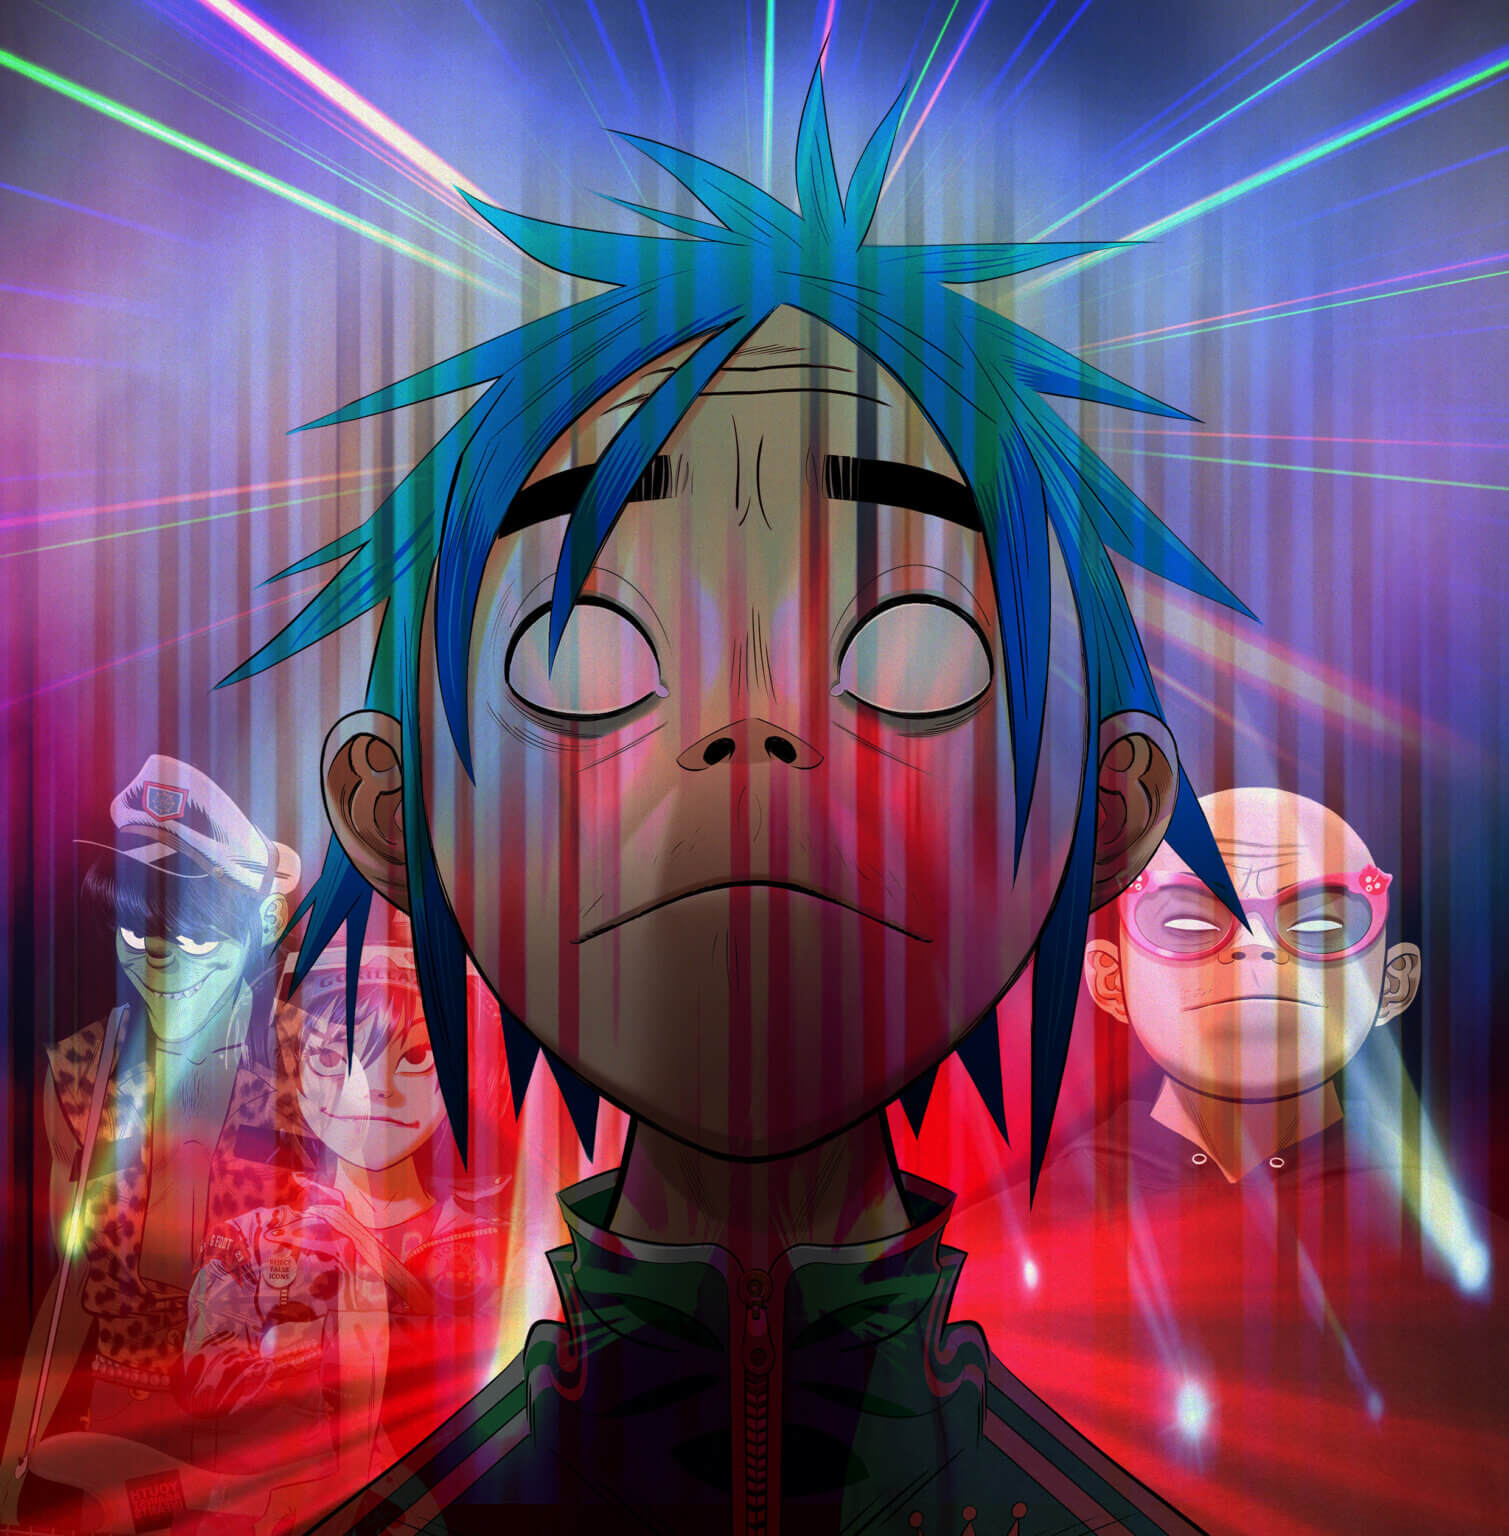 Gorillaz reveal first live performance since 2018 broadcast live around the world with three shows across three time zones through the magic